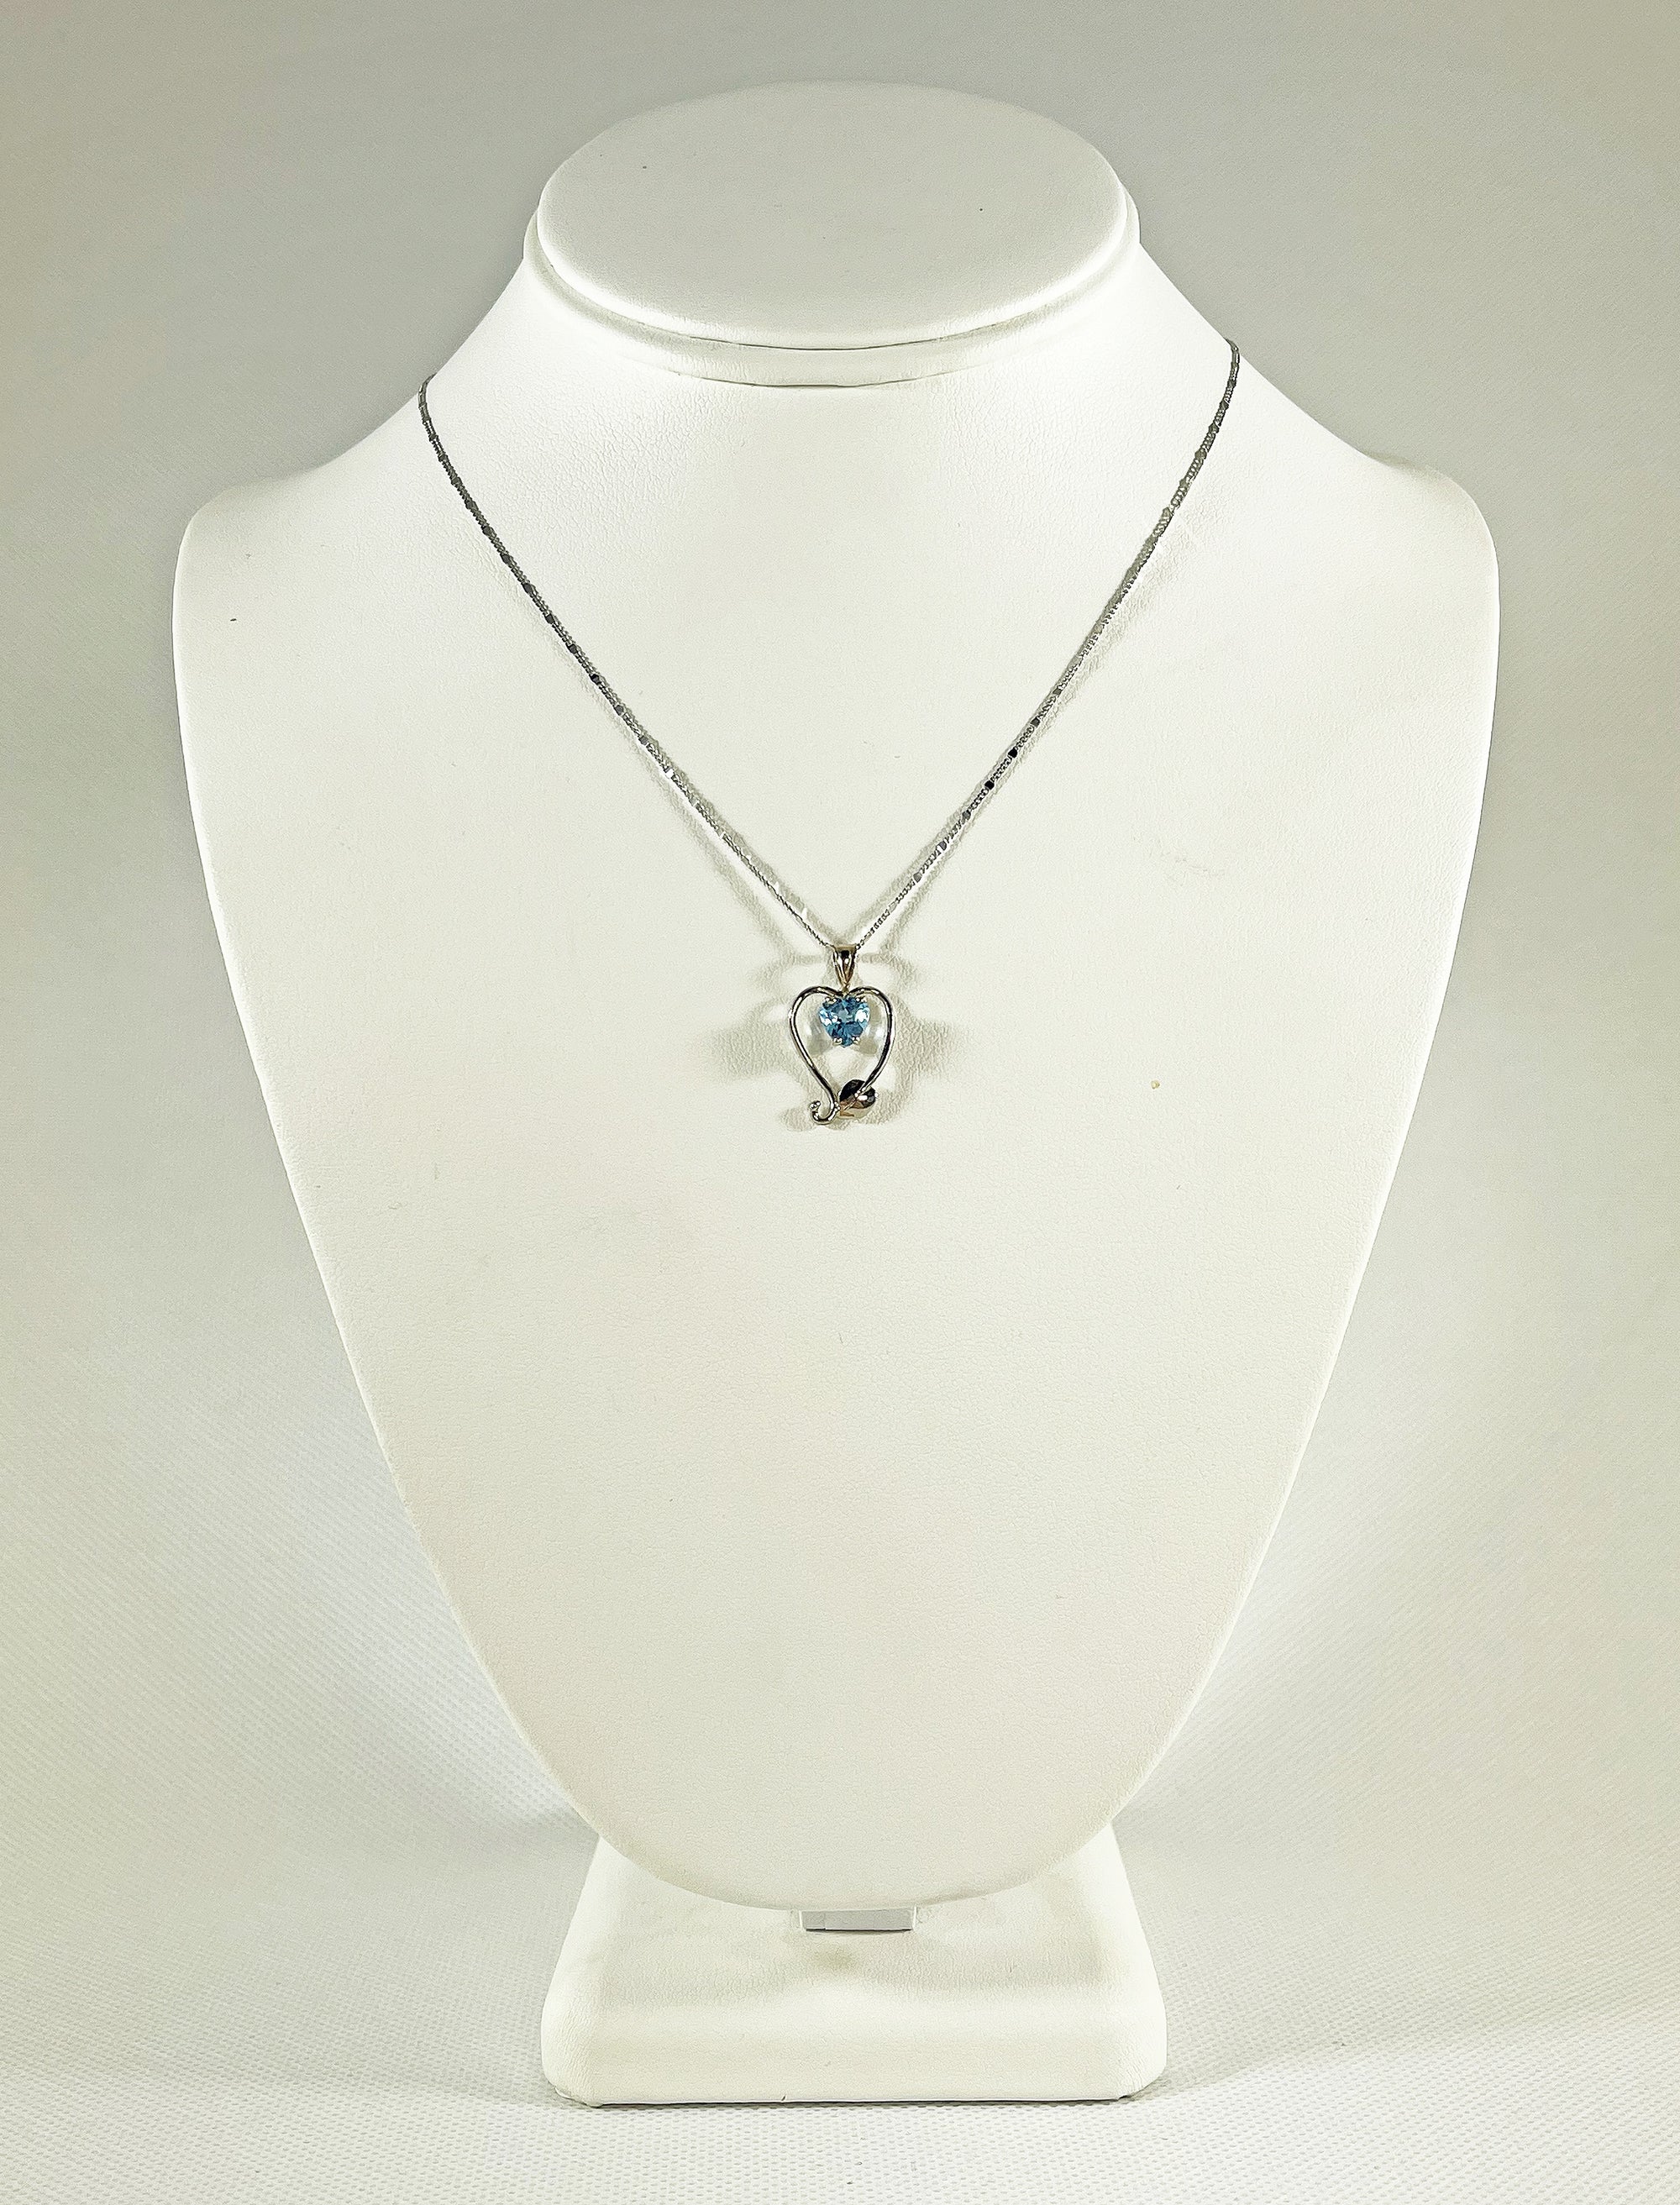 Cole Sheckler Necklace - London Blue Topaz Heart in 14kt White Gold with Ivy Leaves